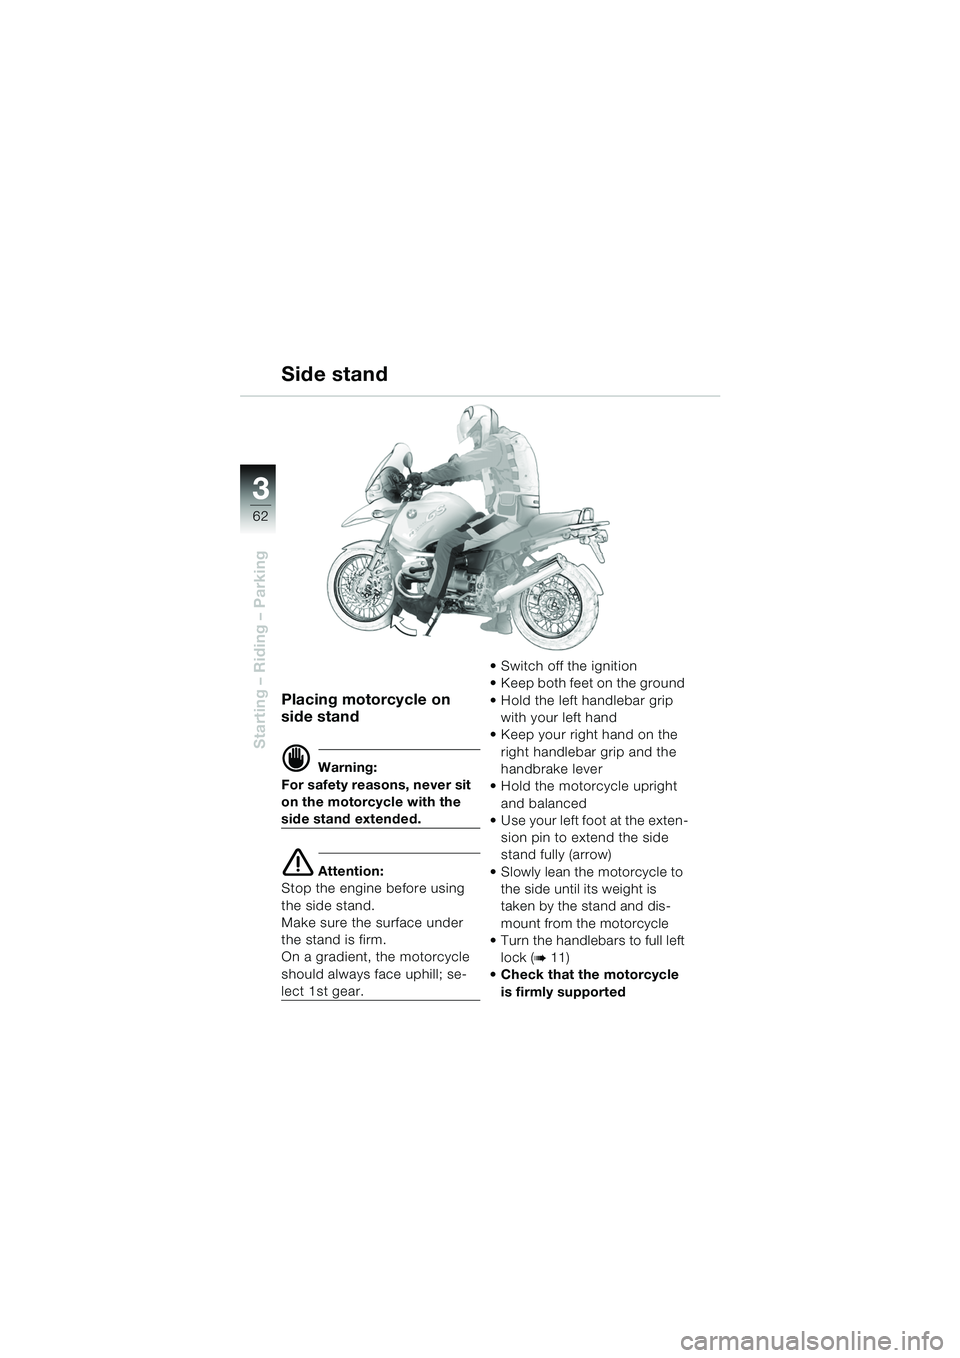 BMW MOTORRAD R 1150 GS 2002  Riders Manual (in English) 3
62
Starting – Riding – Parking
Placing motorcycle on 
side stand
d Warning:
For safety reasons, never sit 
on the motorcycle with the 
side stand extended.
e Attention:
Stop the engine before us